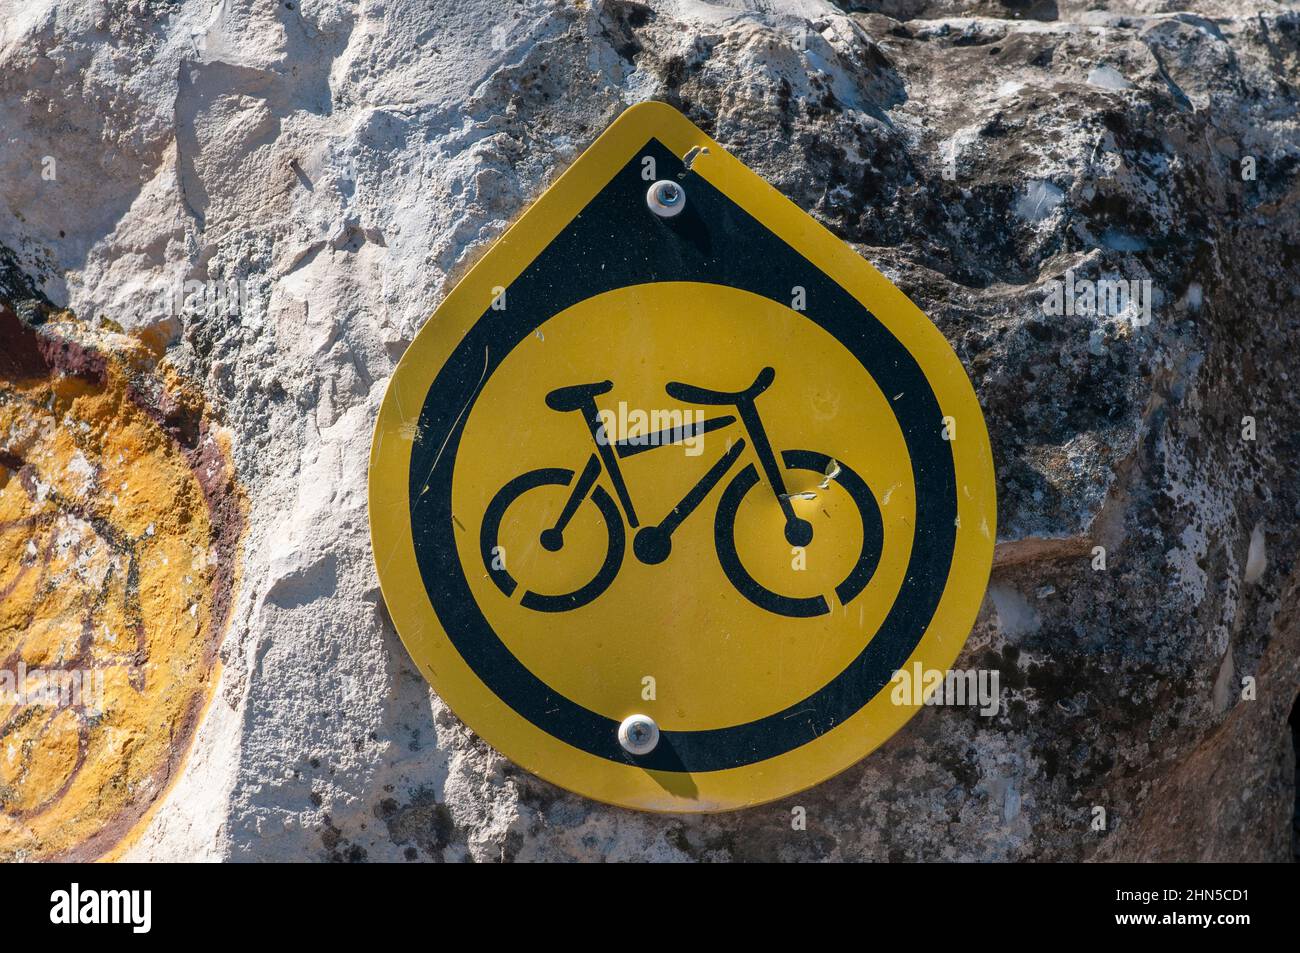 Single track cycling sign pointing in the route's direction. Photographed in the Lower Galilee, Israel Stock Photo